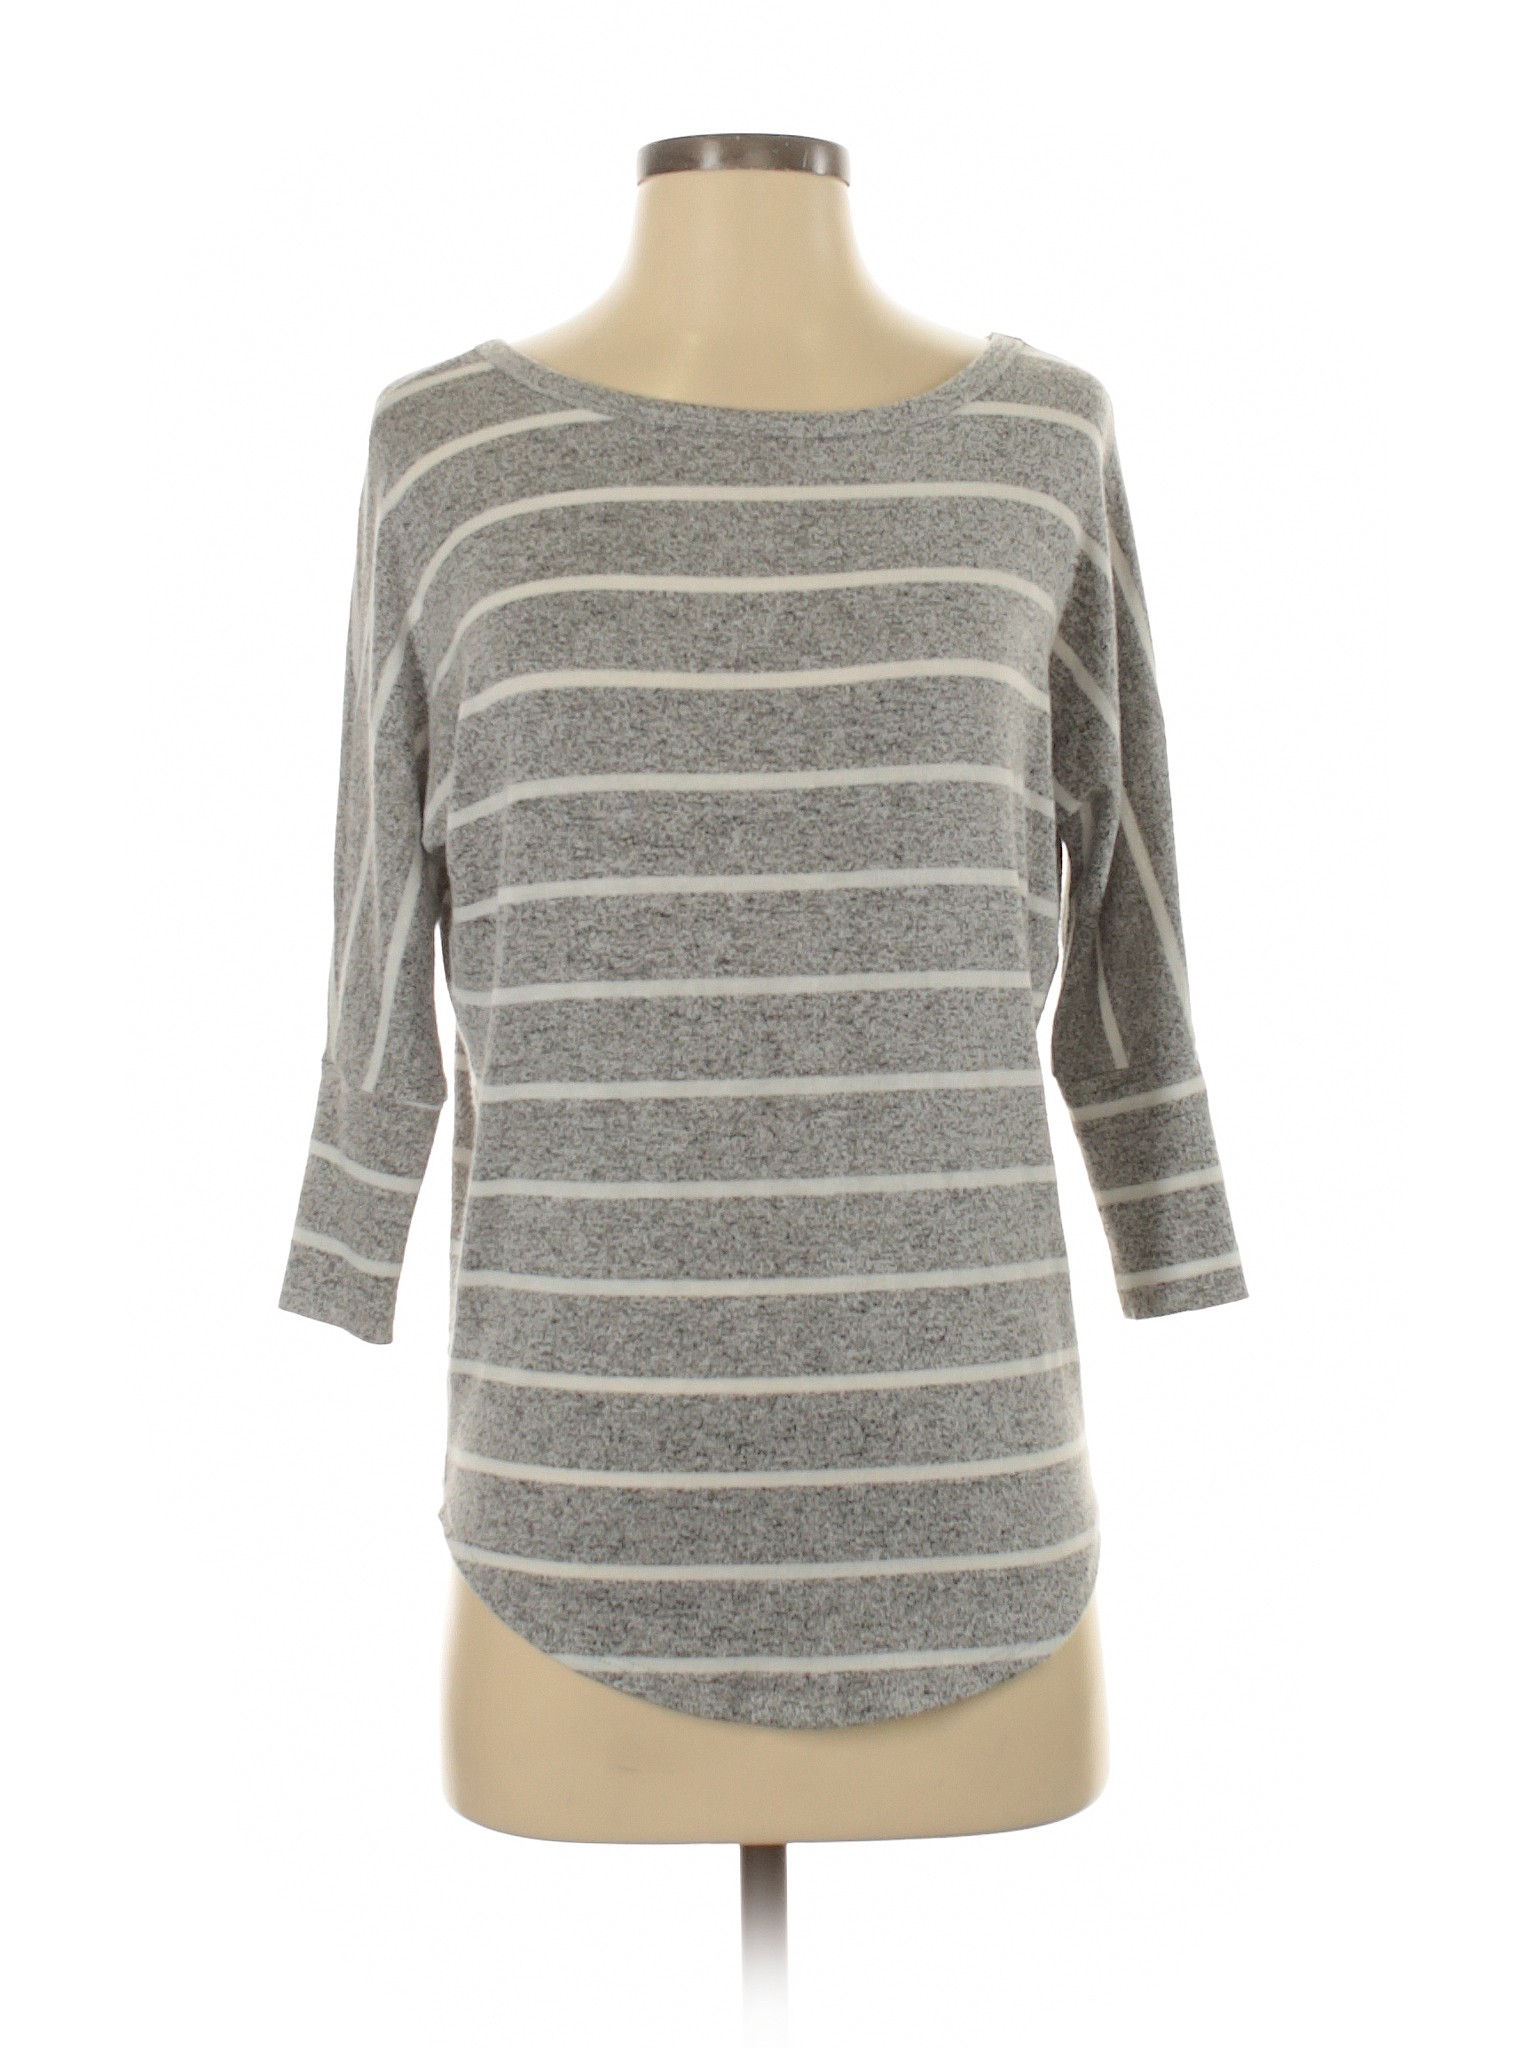 Market and Spruce Women Gray Pullover Sweater XS | eBay